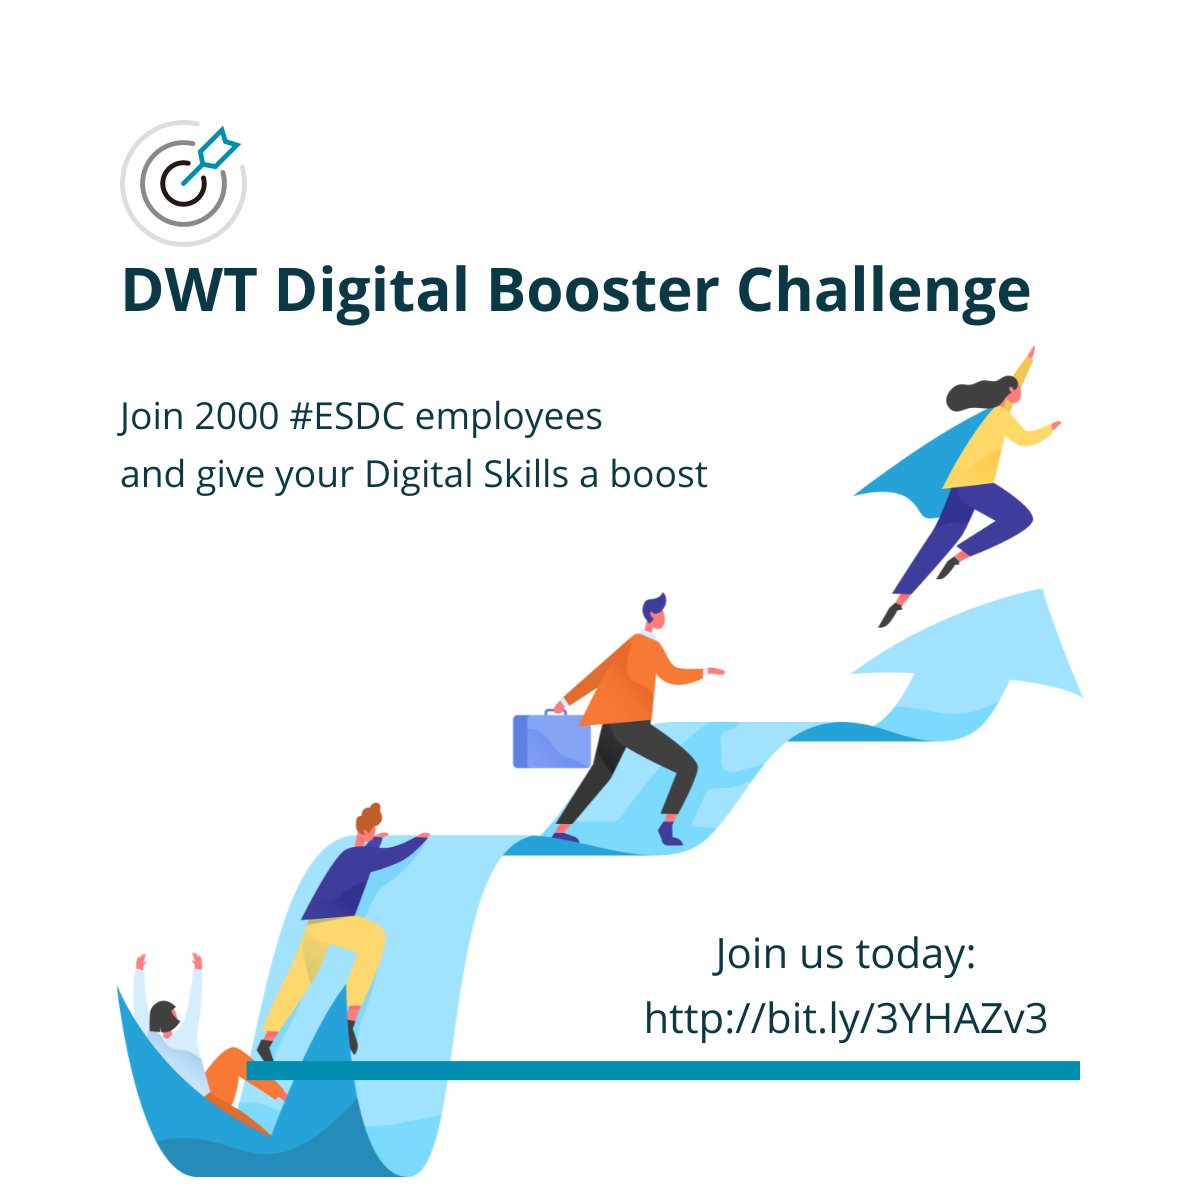 DYK 1965 #ESDC employees took on the #DigitalBooster Challenge to upgrade their Digital Skills?

Register today to benefit from the 7 exercises of 3-5 min each to upgrade ur skills in a visual an engaging way.

Internal registration link: bit.ly/3YHAZv3

#GCDigital